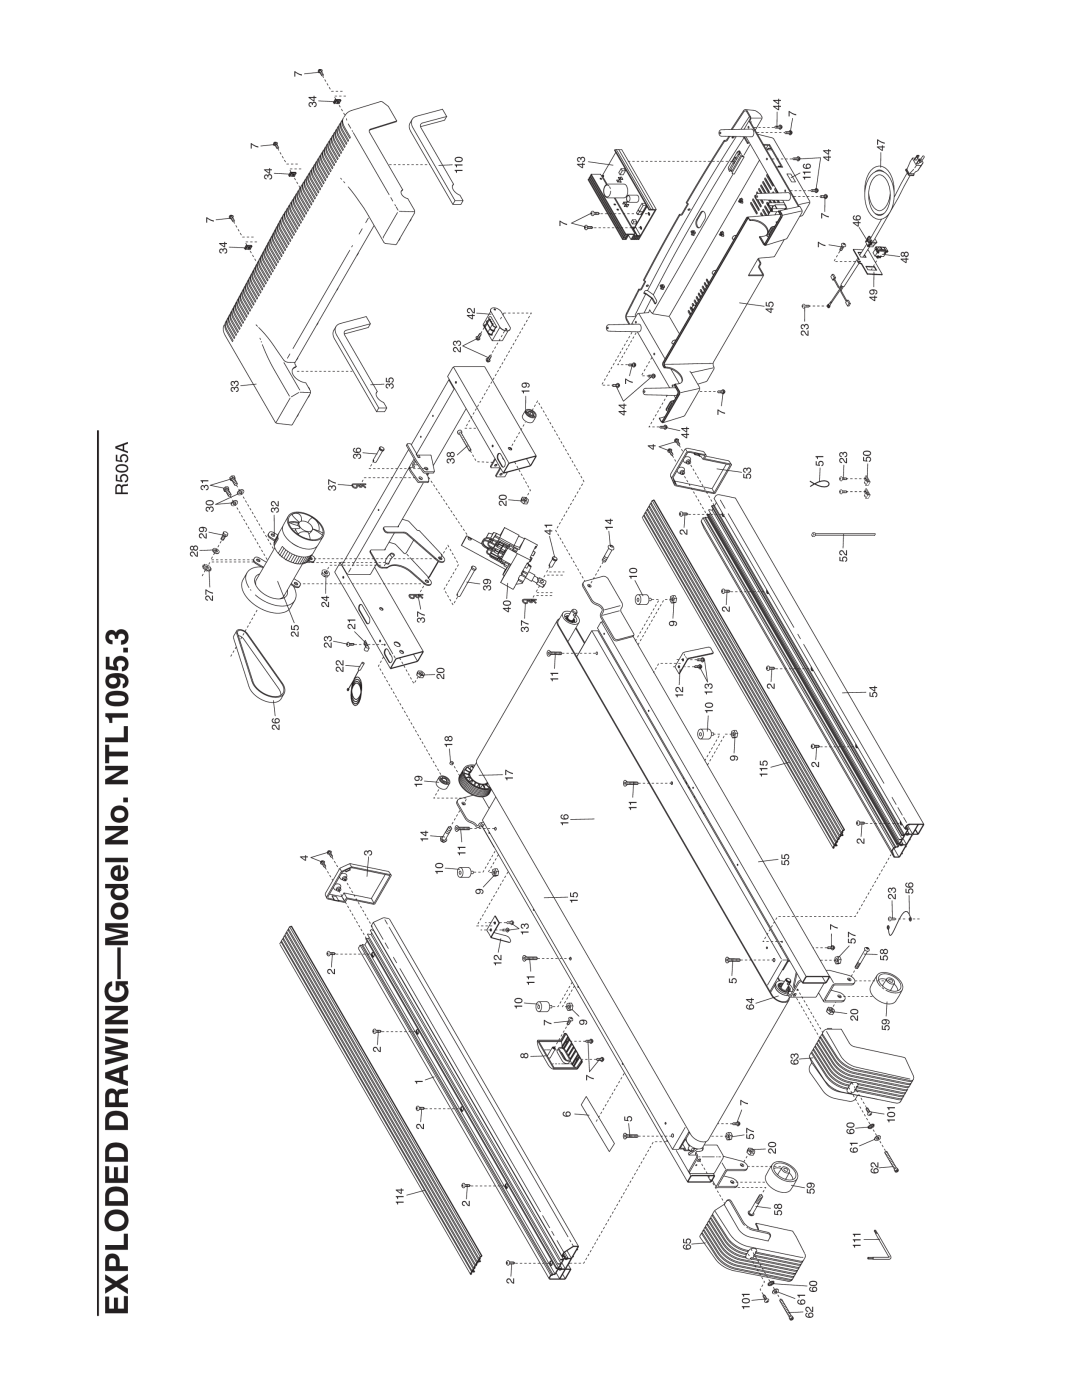 NordicTrack user manual EXPLODED DRAWING-Model No. NTL1095.3, R505A, 40 20 